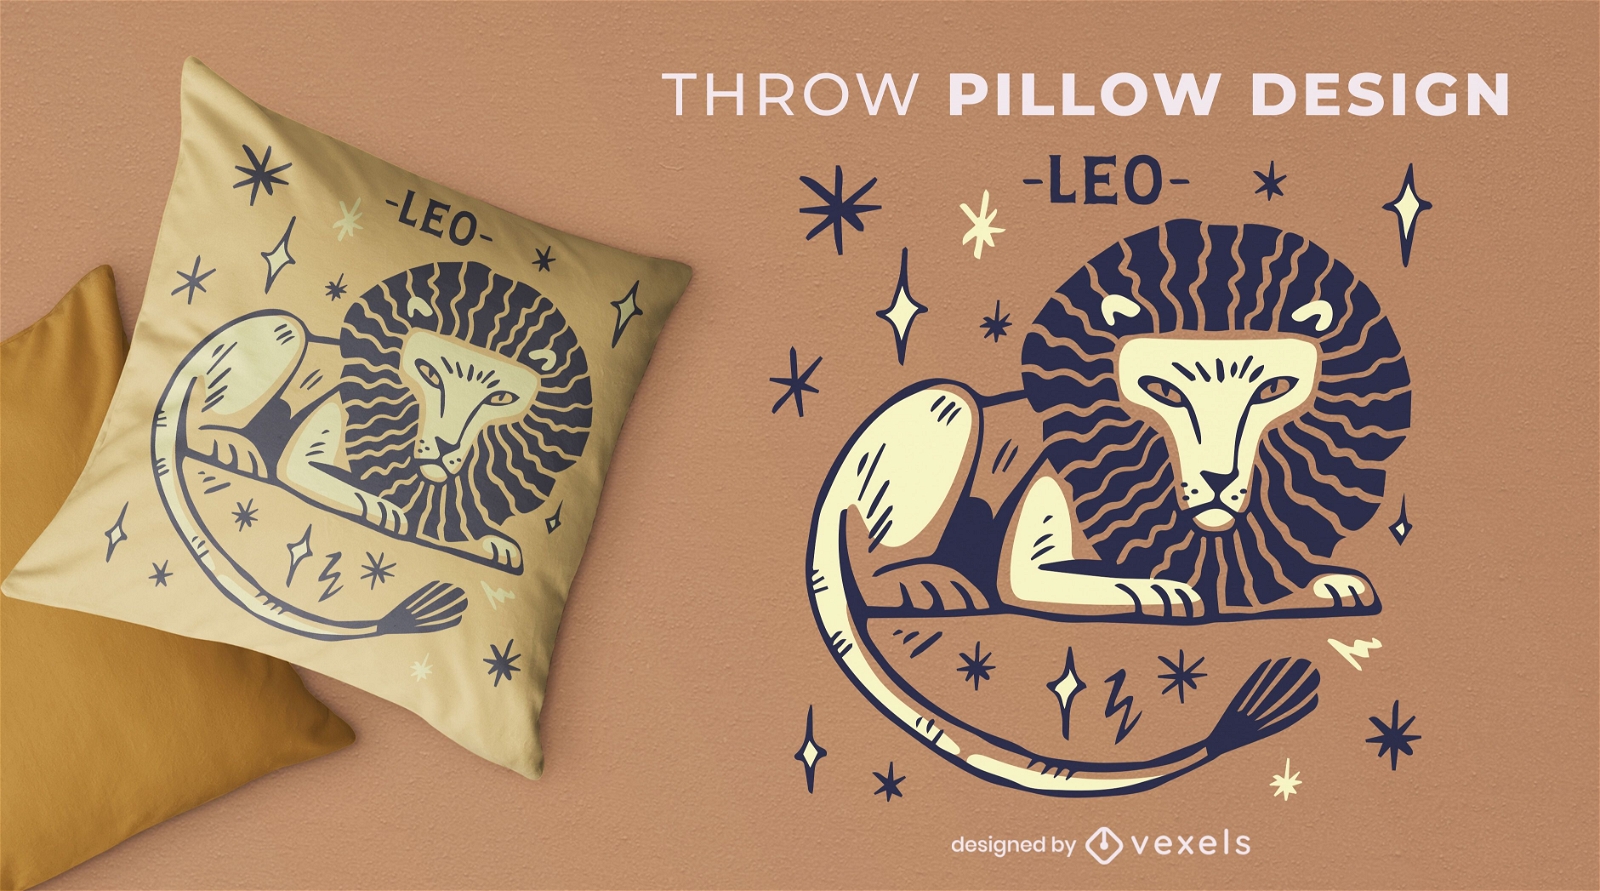 https://images.vexels.com/content/253140/preview/leo-zodiac-sign-hand-drawn-throw-pillow-d316a3.png